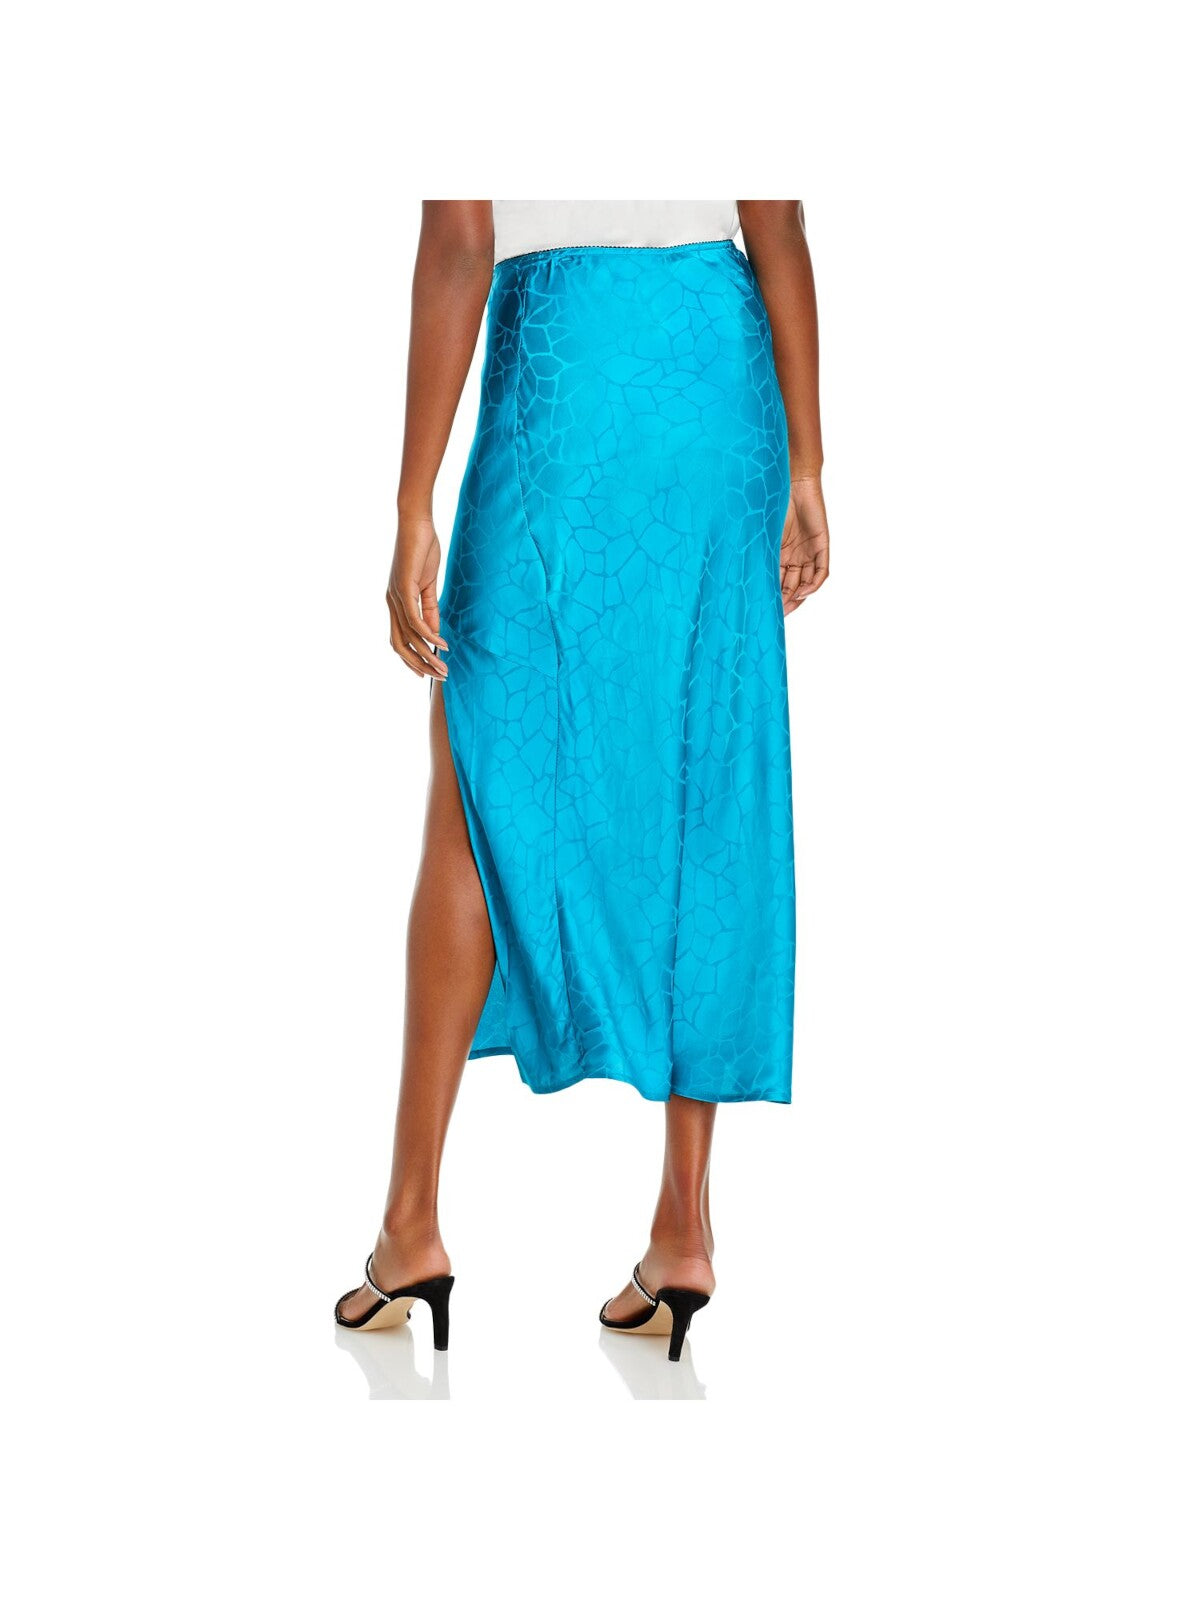 THE ANDAMANE Womens Teal Stretch Slitted Pull On Style Animal Print Midi Party Pencil Skirt L